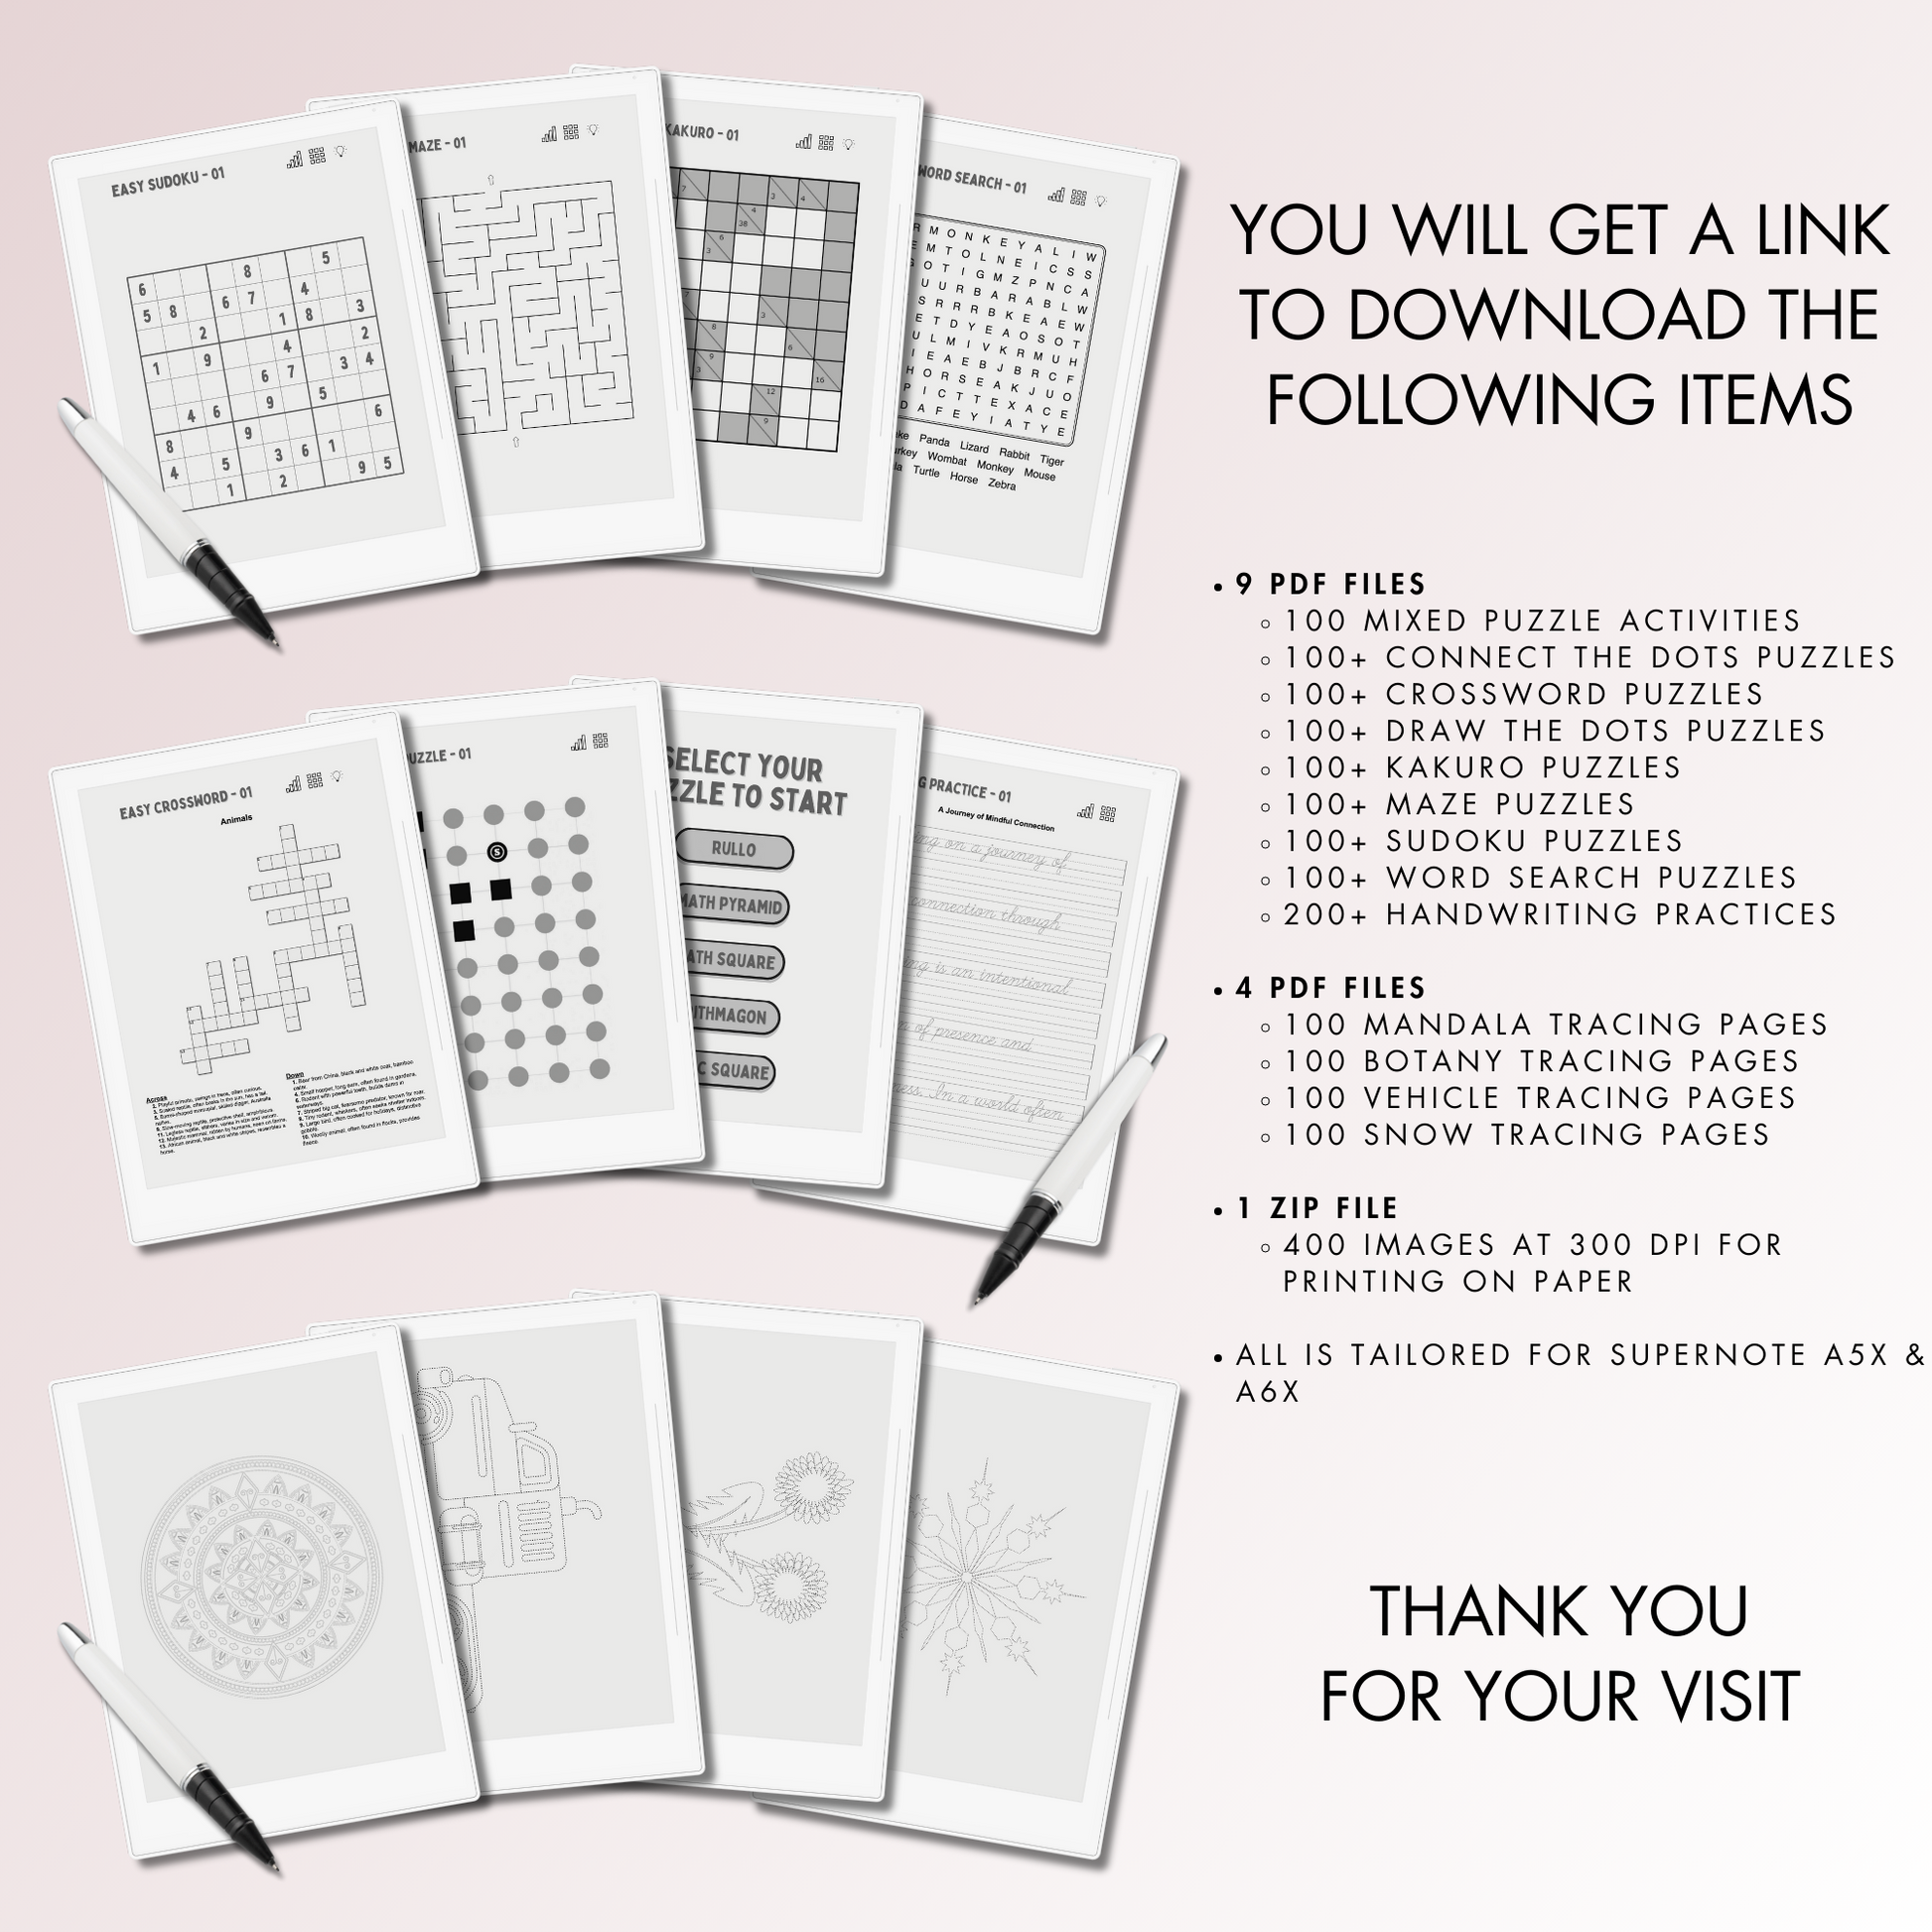 You will get 9 PDF files for 100 Mixed Puzzle Activities, 100+ Connect the Dots Puzzles, 100+ Crossword Puzzles, 100+ Kakuro Puzzles, 100+ Maze Puzzles, 100+ Sudoku Puzzles, 100+ Word Search Puzzles, 200+ Handwriting Practices, 100+ Draw the Dots Puzzles, 4 PDF files for 100 mandala tracing pages, 100 botany tracing pages, 100 vehicle tracing pages, 100 snow tracing pages and 400 images at 300 dpi for printing on paper.